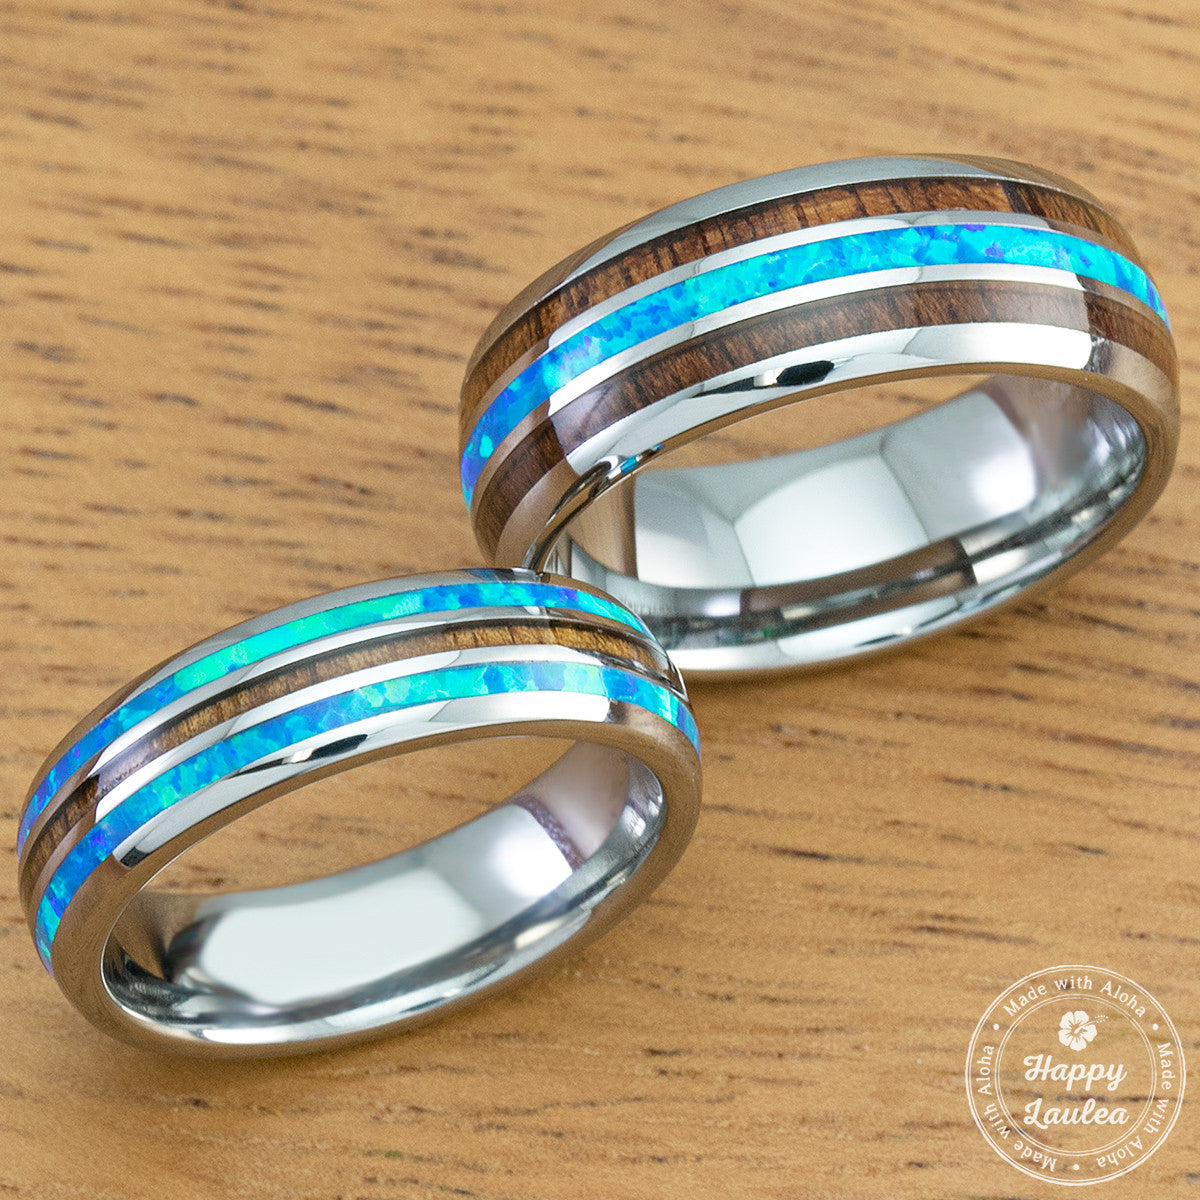 Pair of 6 & 8mm Width Tungsten Wedding Band Ring Set with Blue Opal and Koa Wood (Assorted Designs)